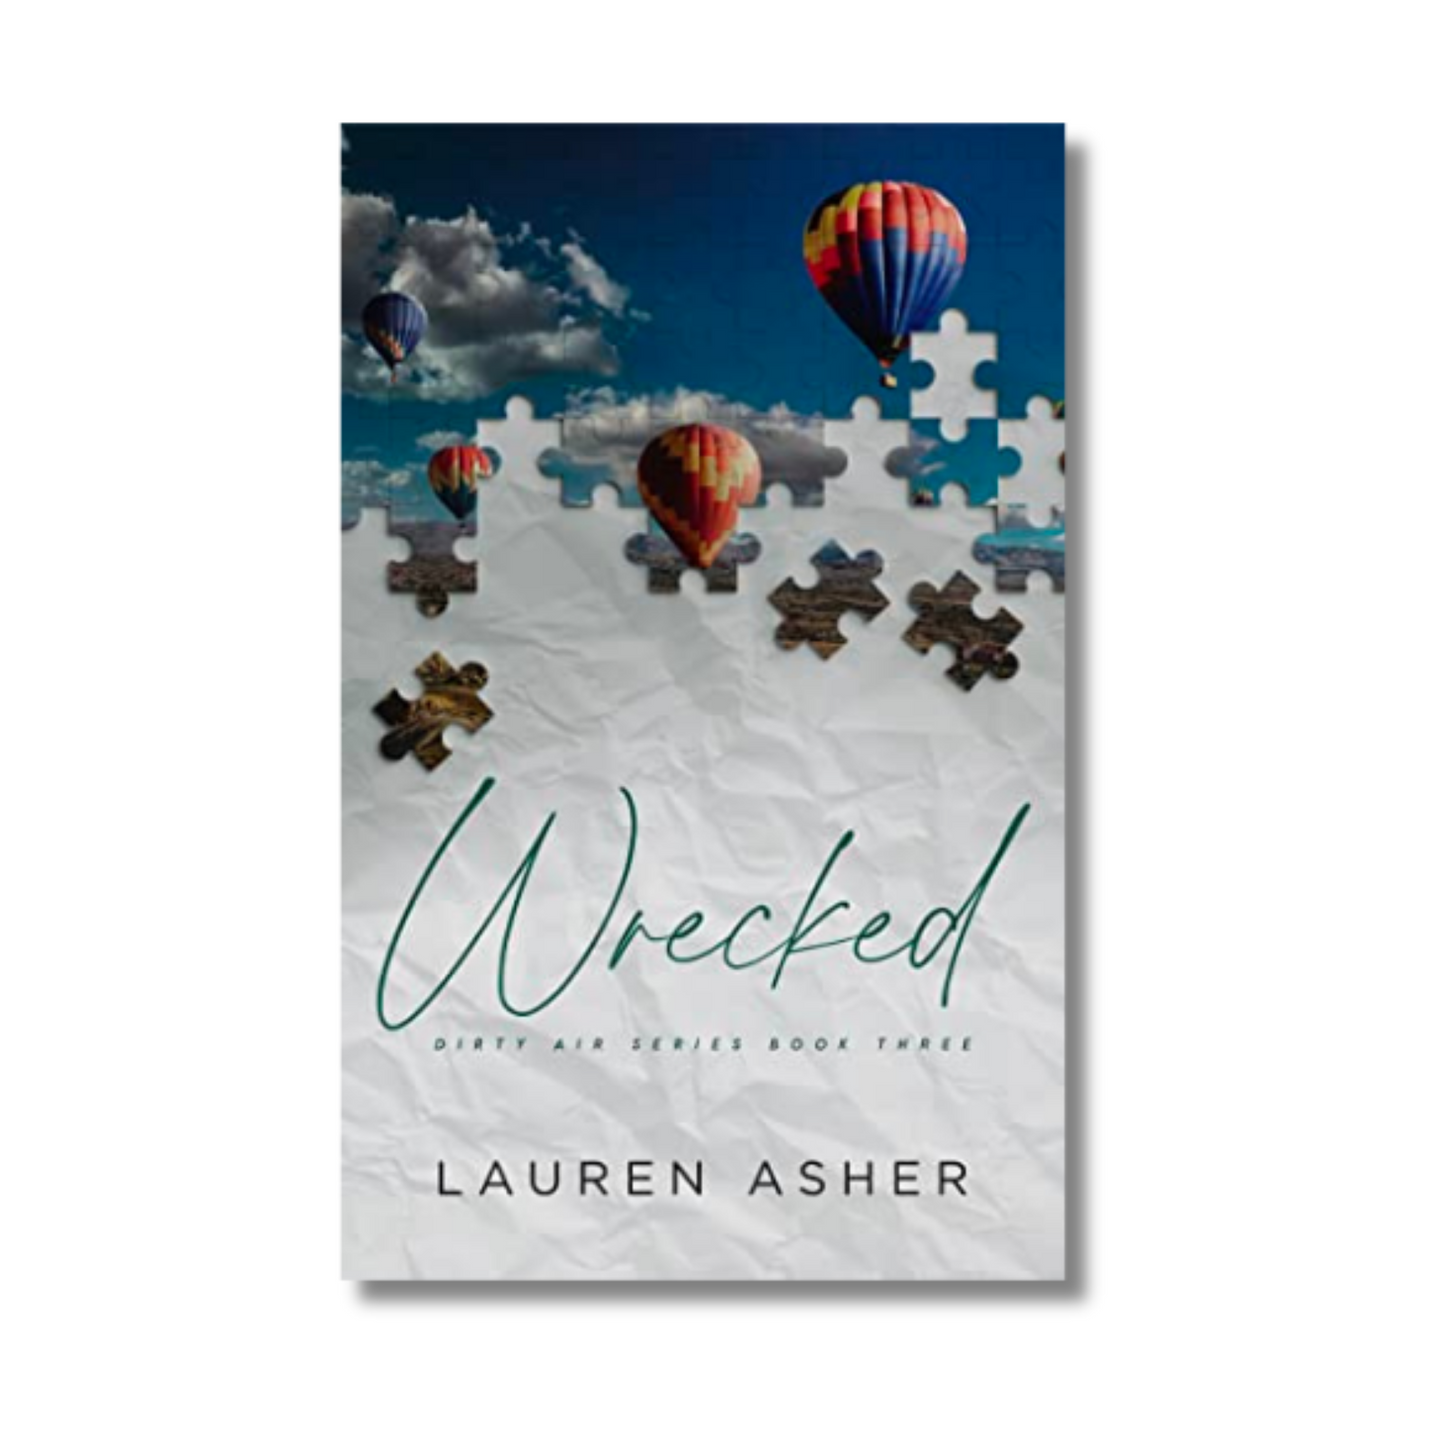 Wrecked (Dirty Air #3) By Lauren Asher (Paperback)